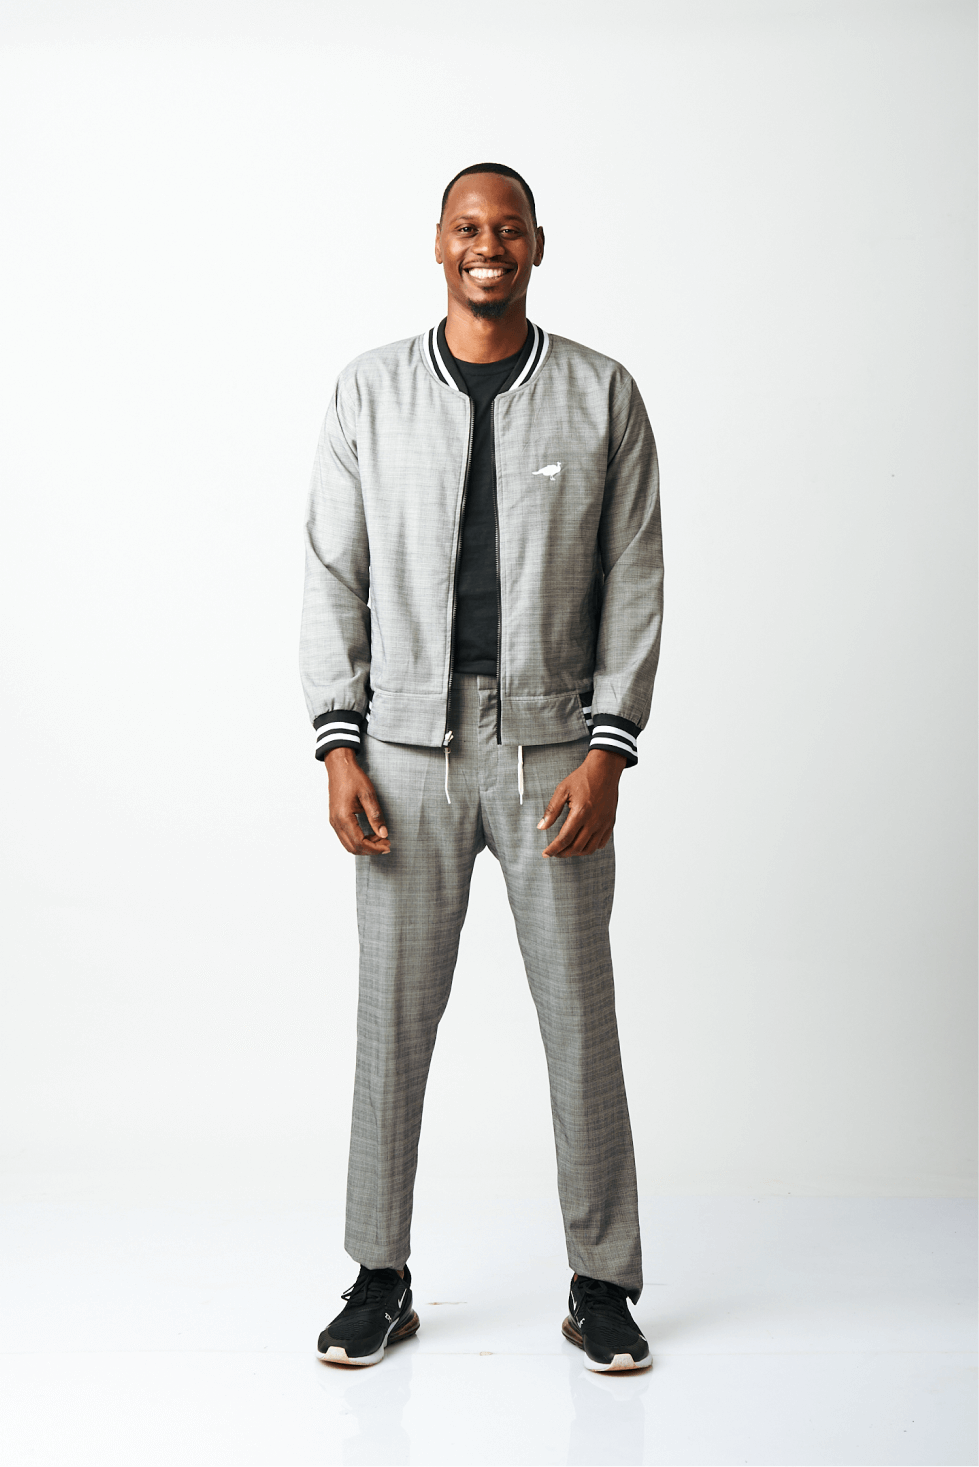 Shop Bomber Suit by Genteel on Arrai. Discover stylish, affordable clothing, jewelry, handbags and unique handmade pieces from top Kenyan & African fashion brands prioritising sustainability and quality craftsmanship.